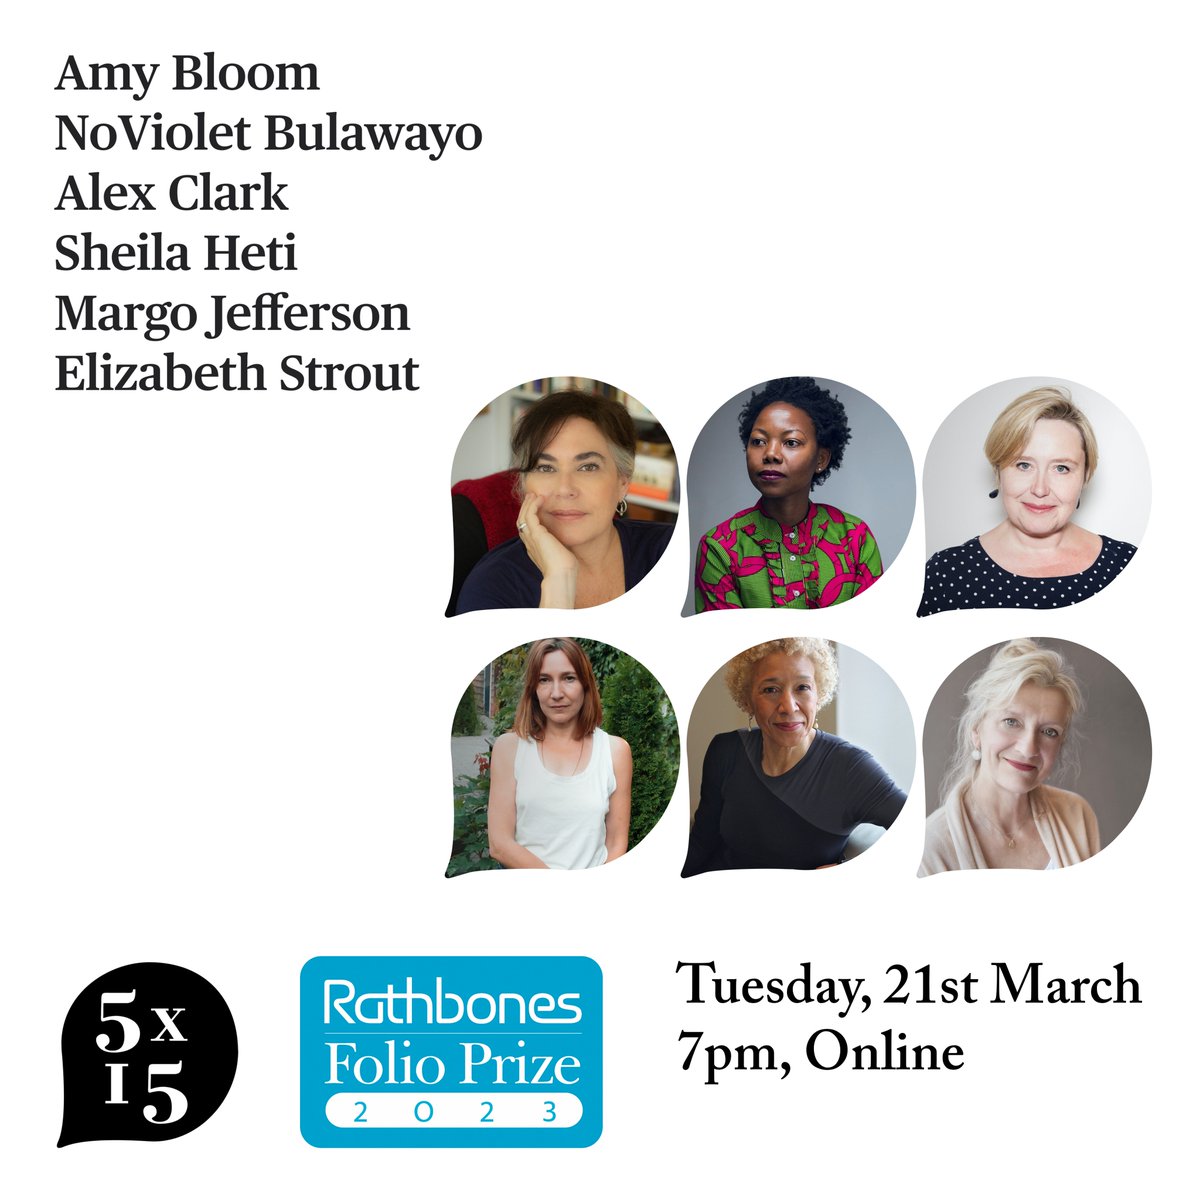 Next week! Don't miss our superb #RathbonesFolioPrize shortlist event with @5x15stories on Tuesday 21st March, 7pm, to hear @AmyBloomBooks, NoViolet Bulawayo, Sheila Heti, @jeffersonmargo and @LizStrout, hosted by @AlexClark3 ✨ Online tickets: bit.ly/41DHMbz